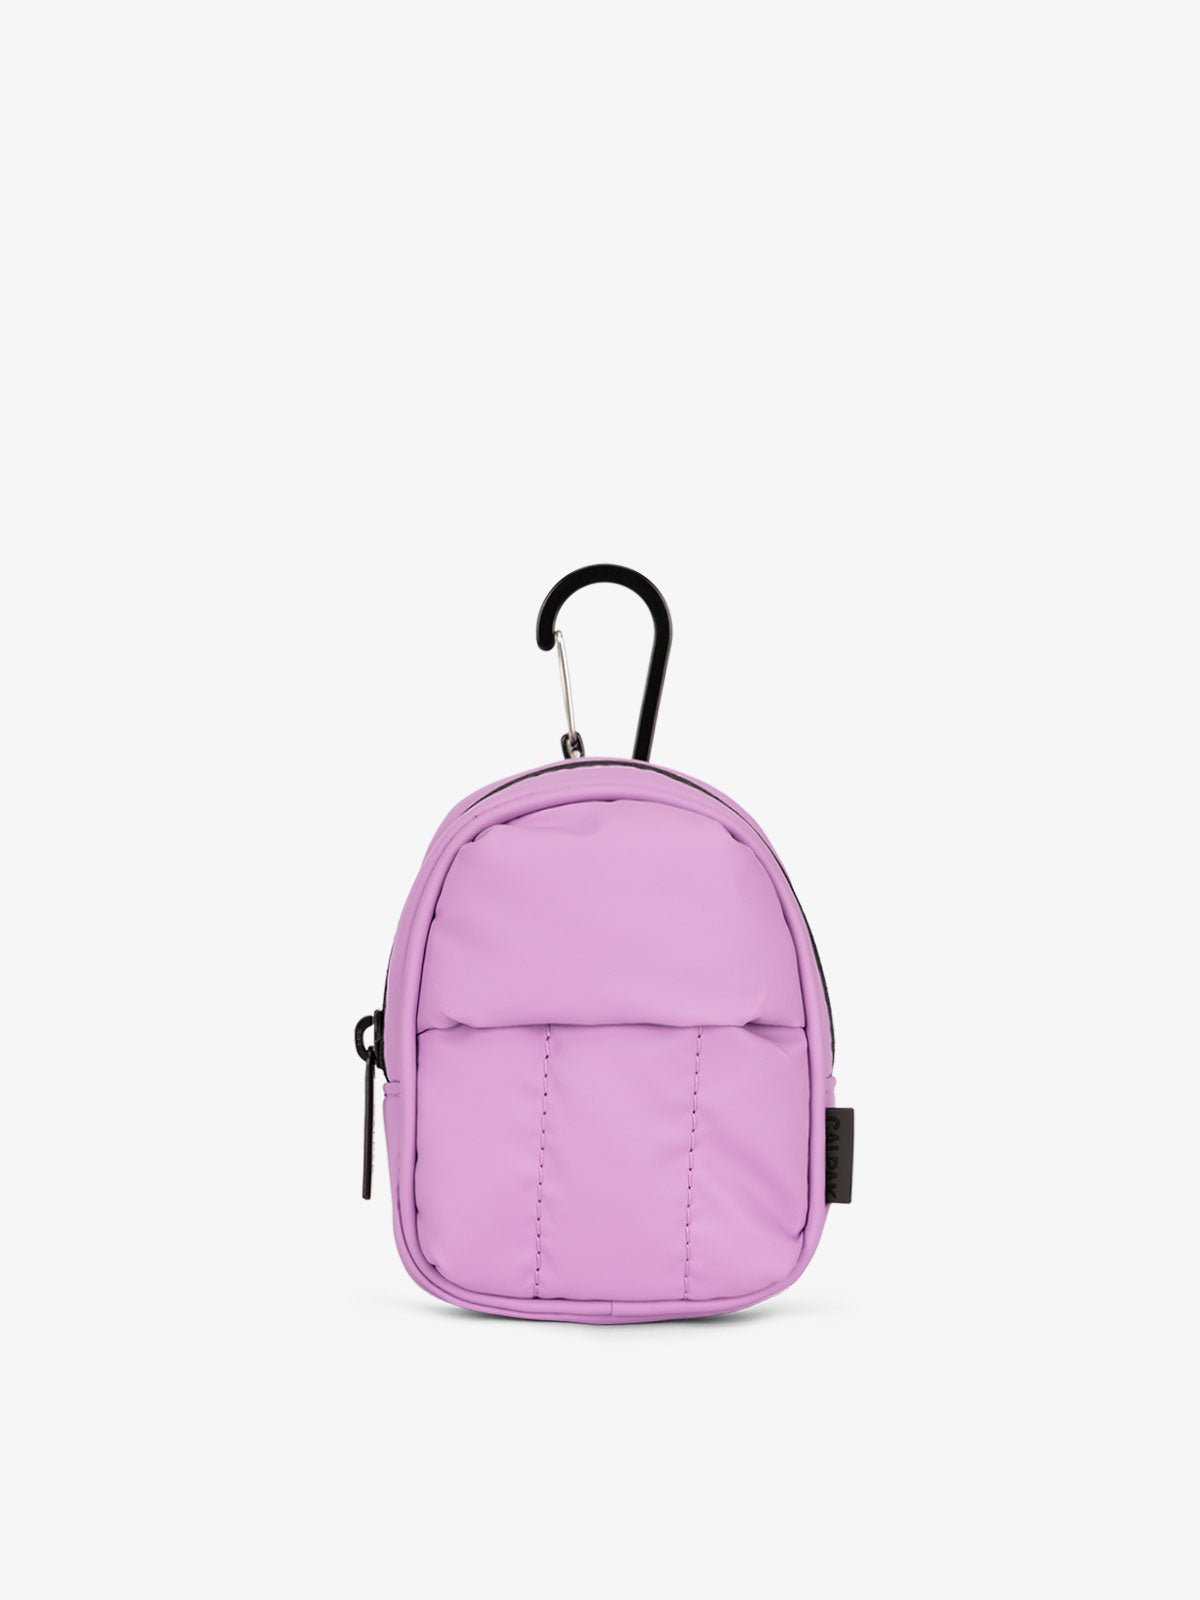 CALPAK Luka key pouch with carabiner clip in lavender